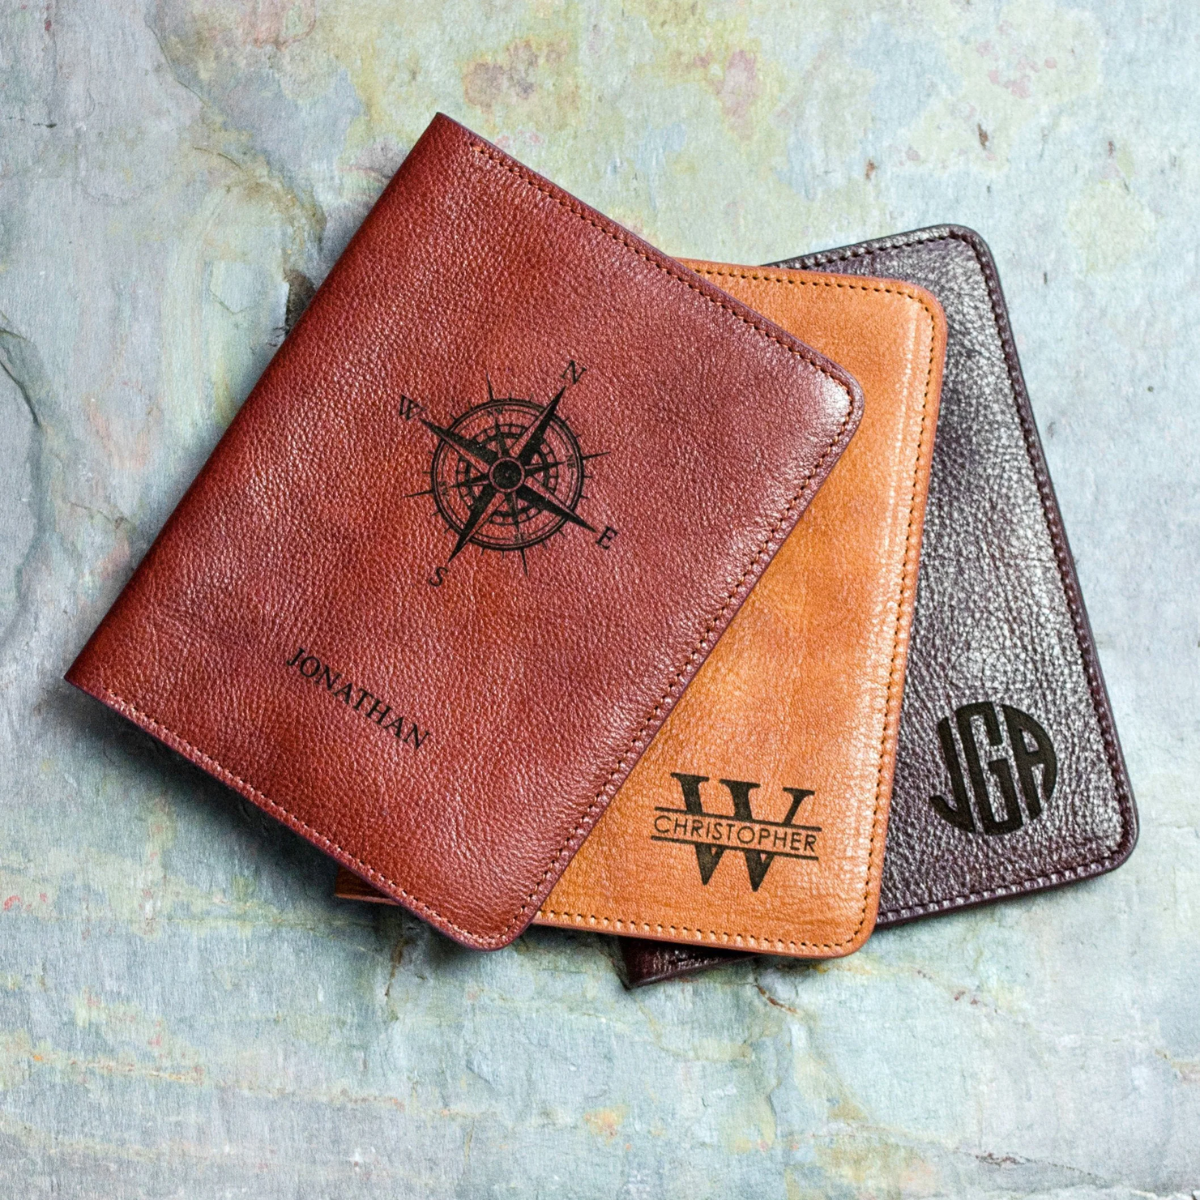 32. Personalized Leather Passport Cover: A Unique and Thoughtful Anniversary Gift for Him